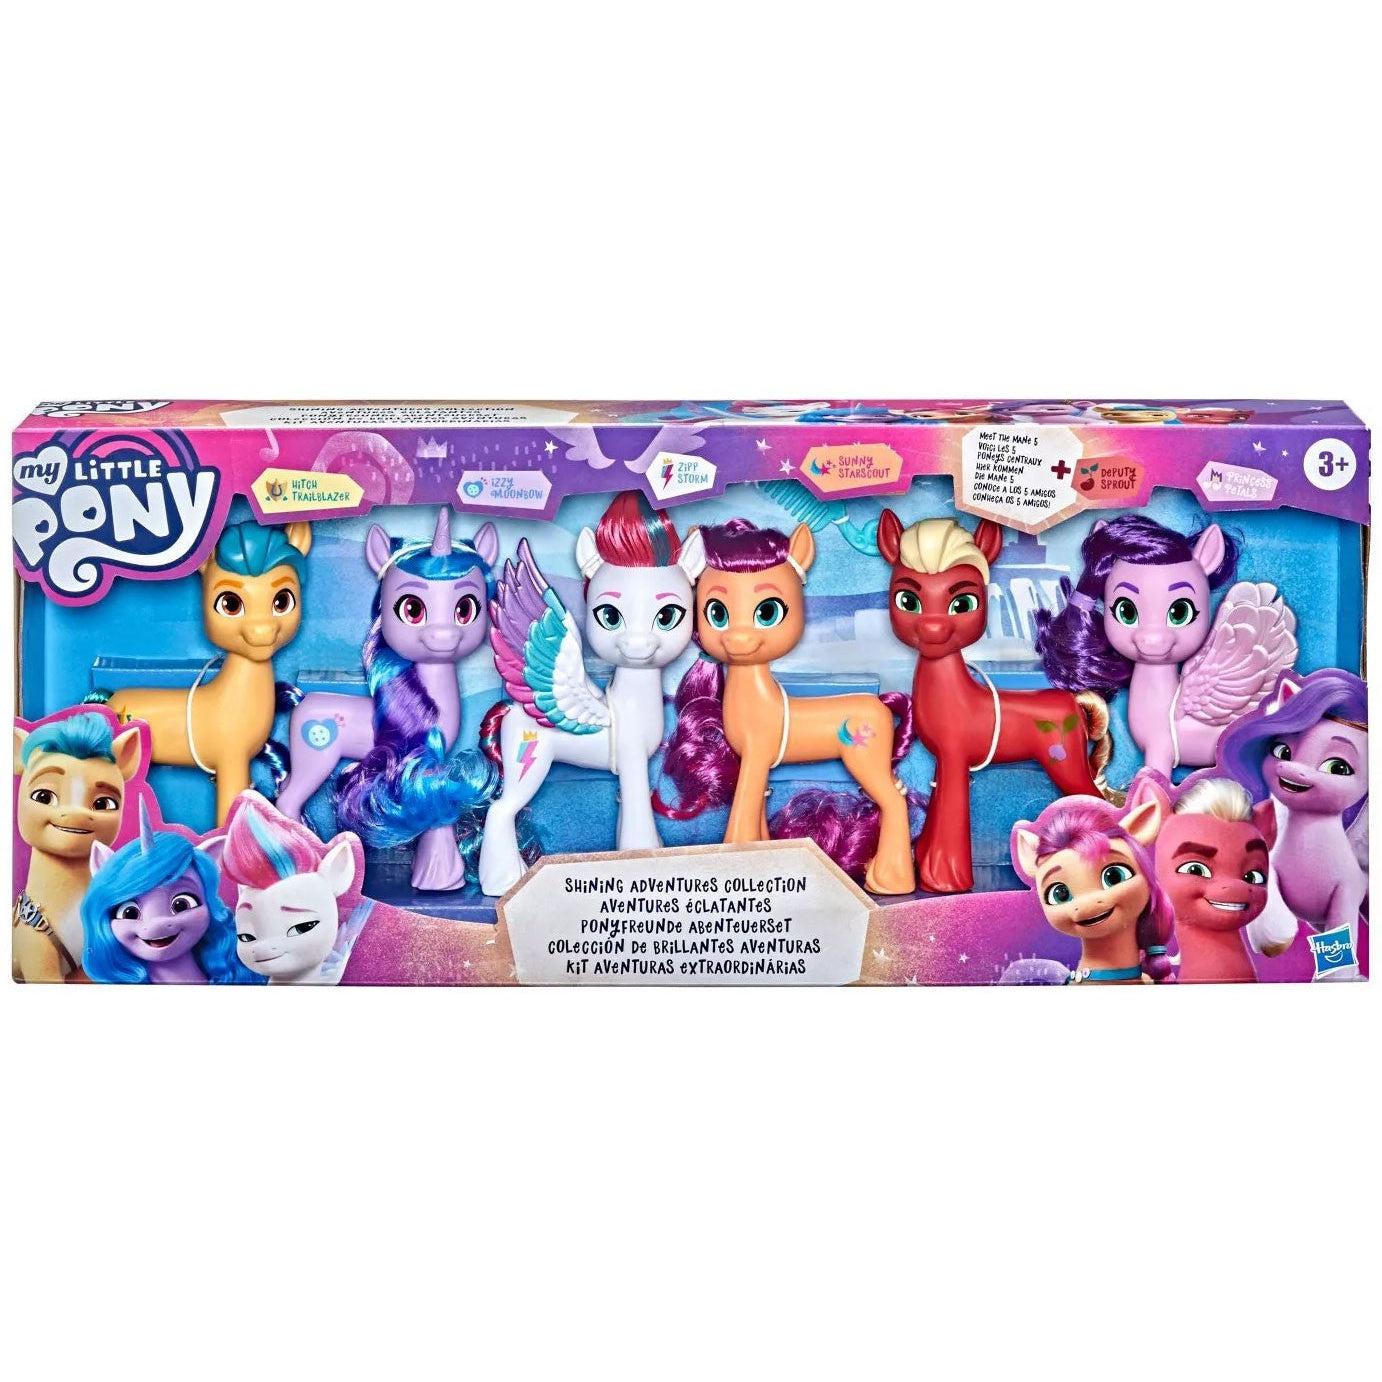 Hasbro-My Little Pony: A New Generation Movie Shining Adventures Collection-F1783-Legacy Toys